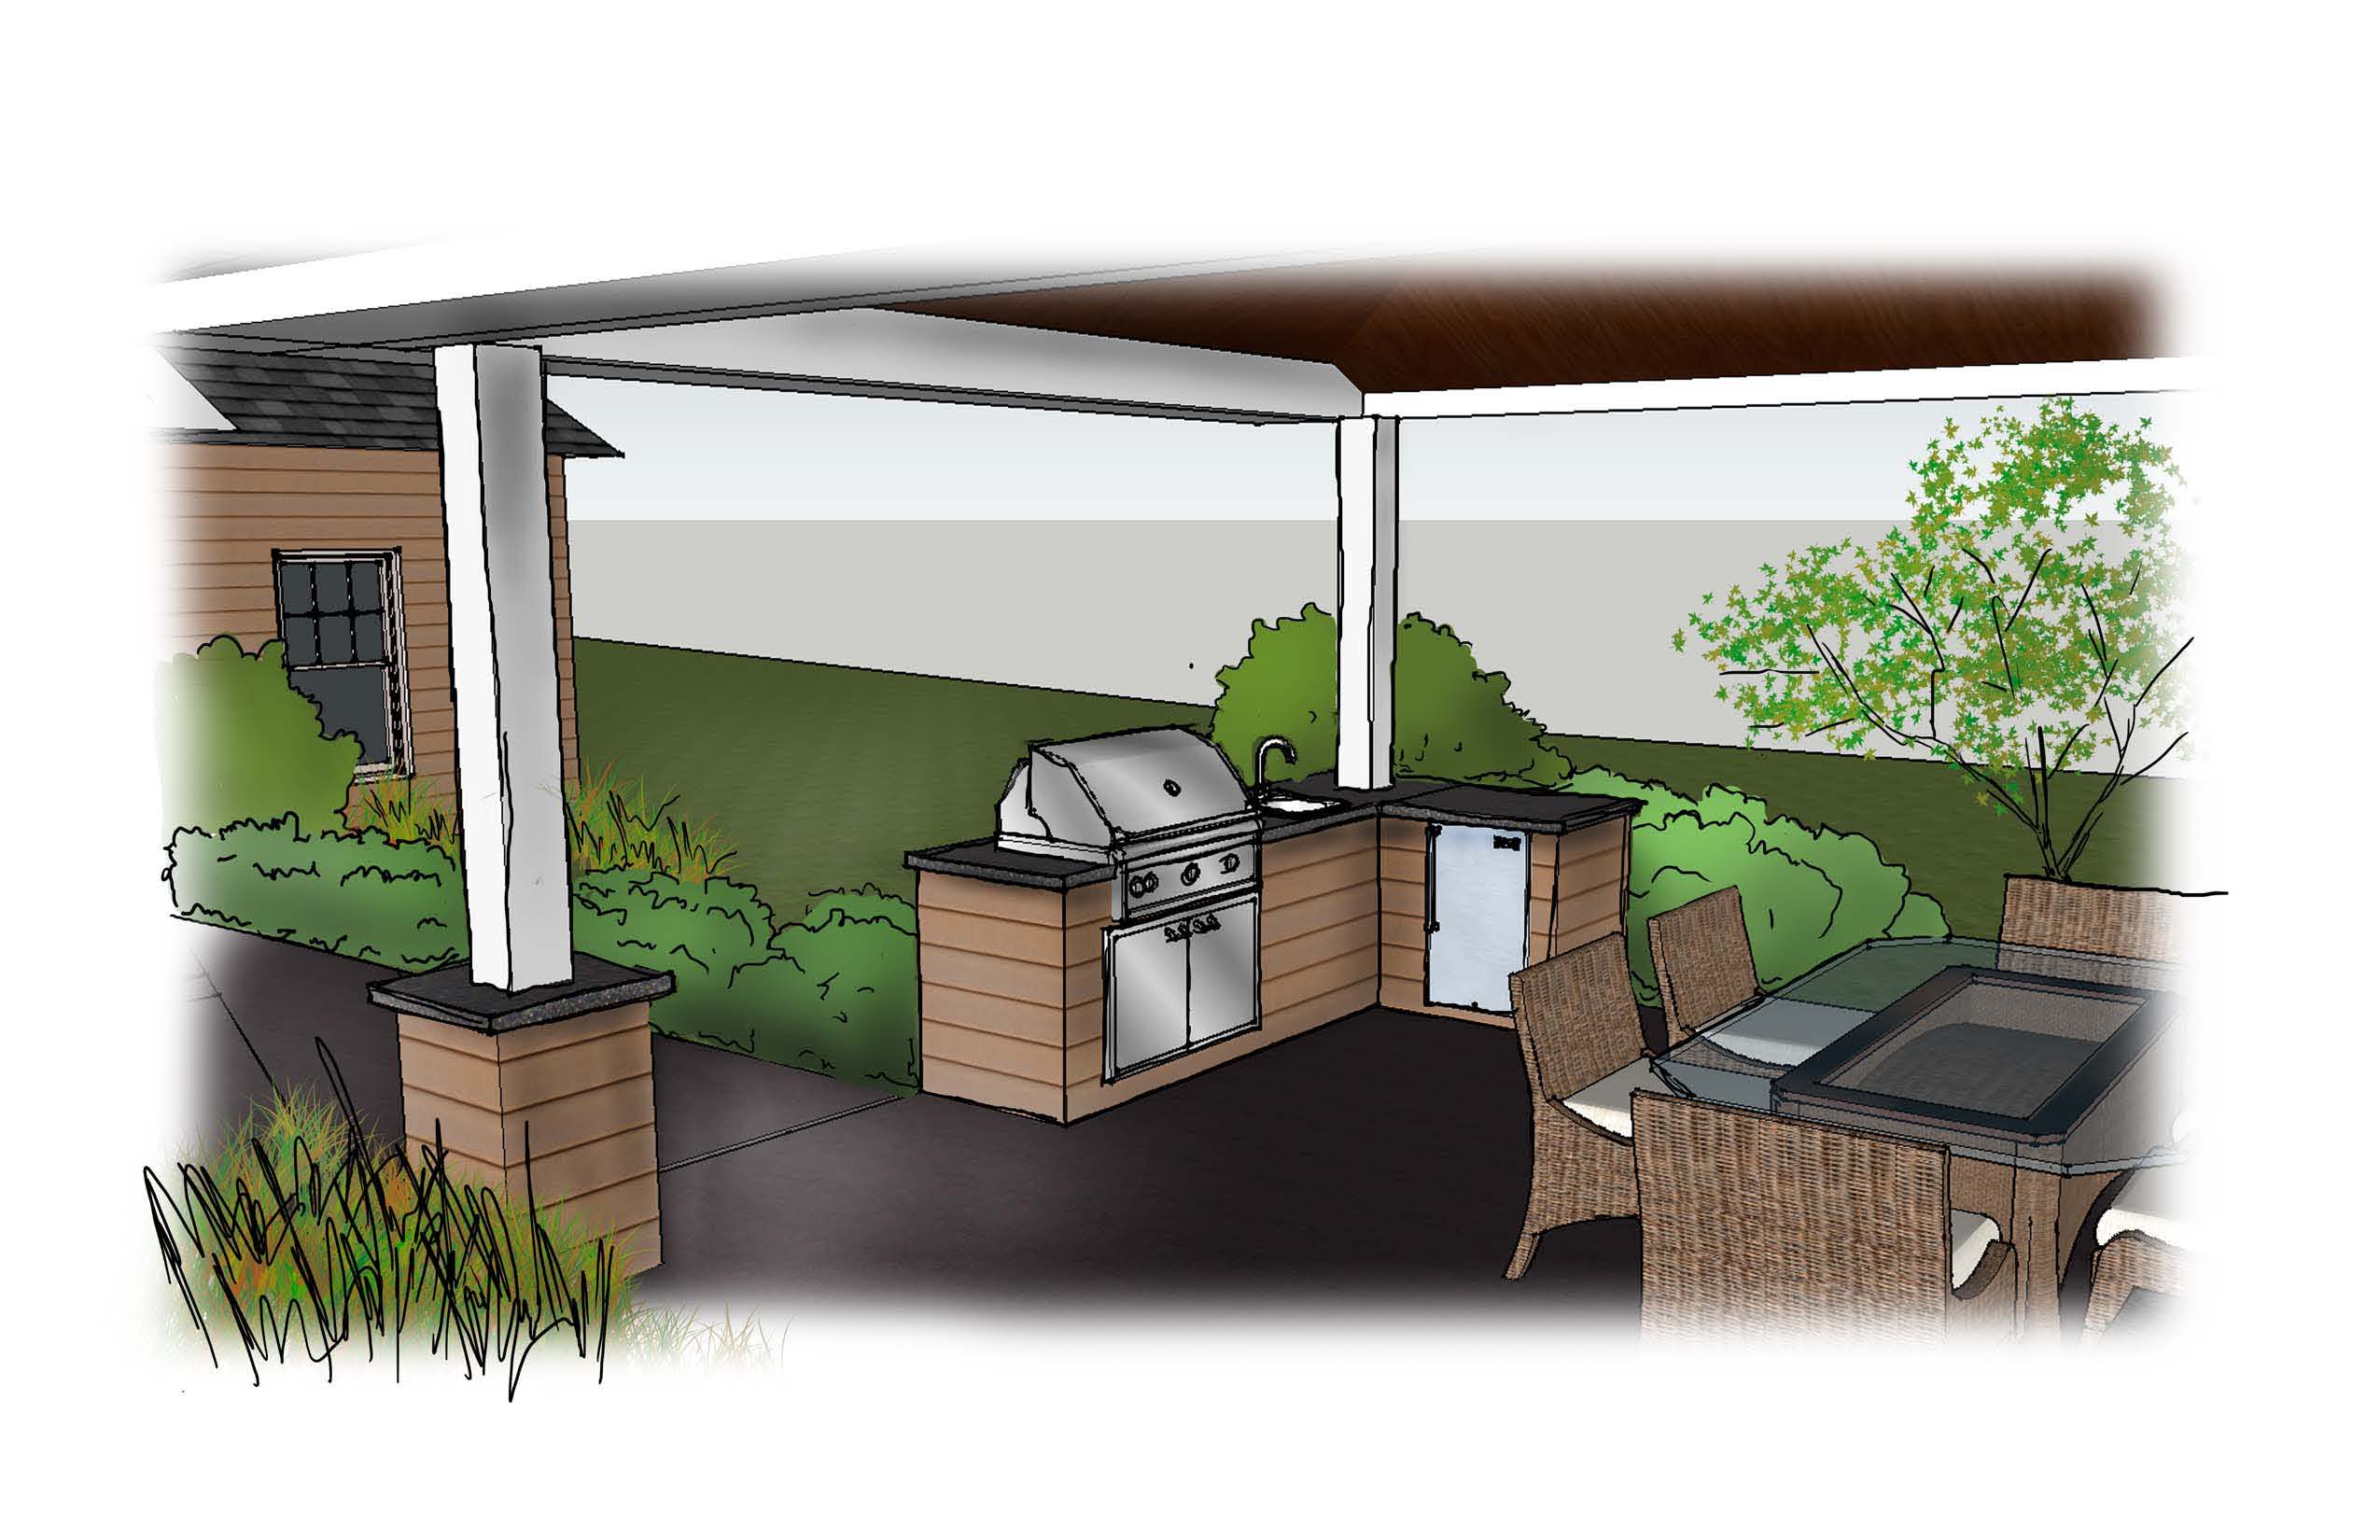 L Shaped outdoor kitchen with framed box and James Hardie finish